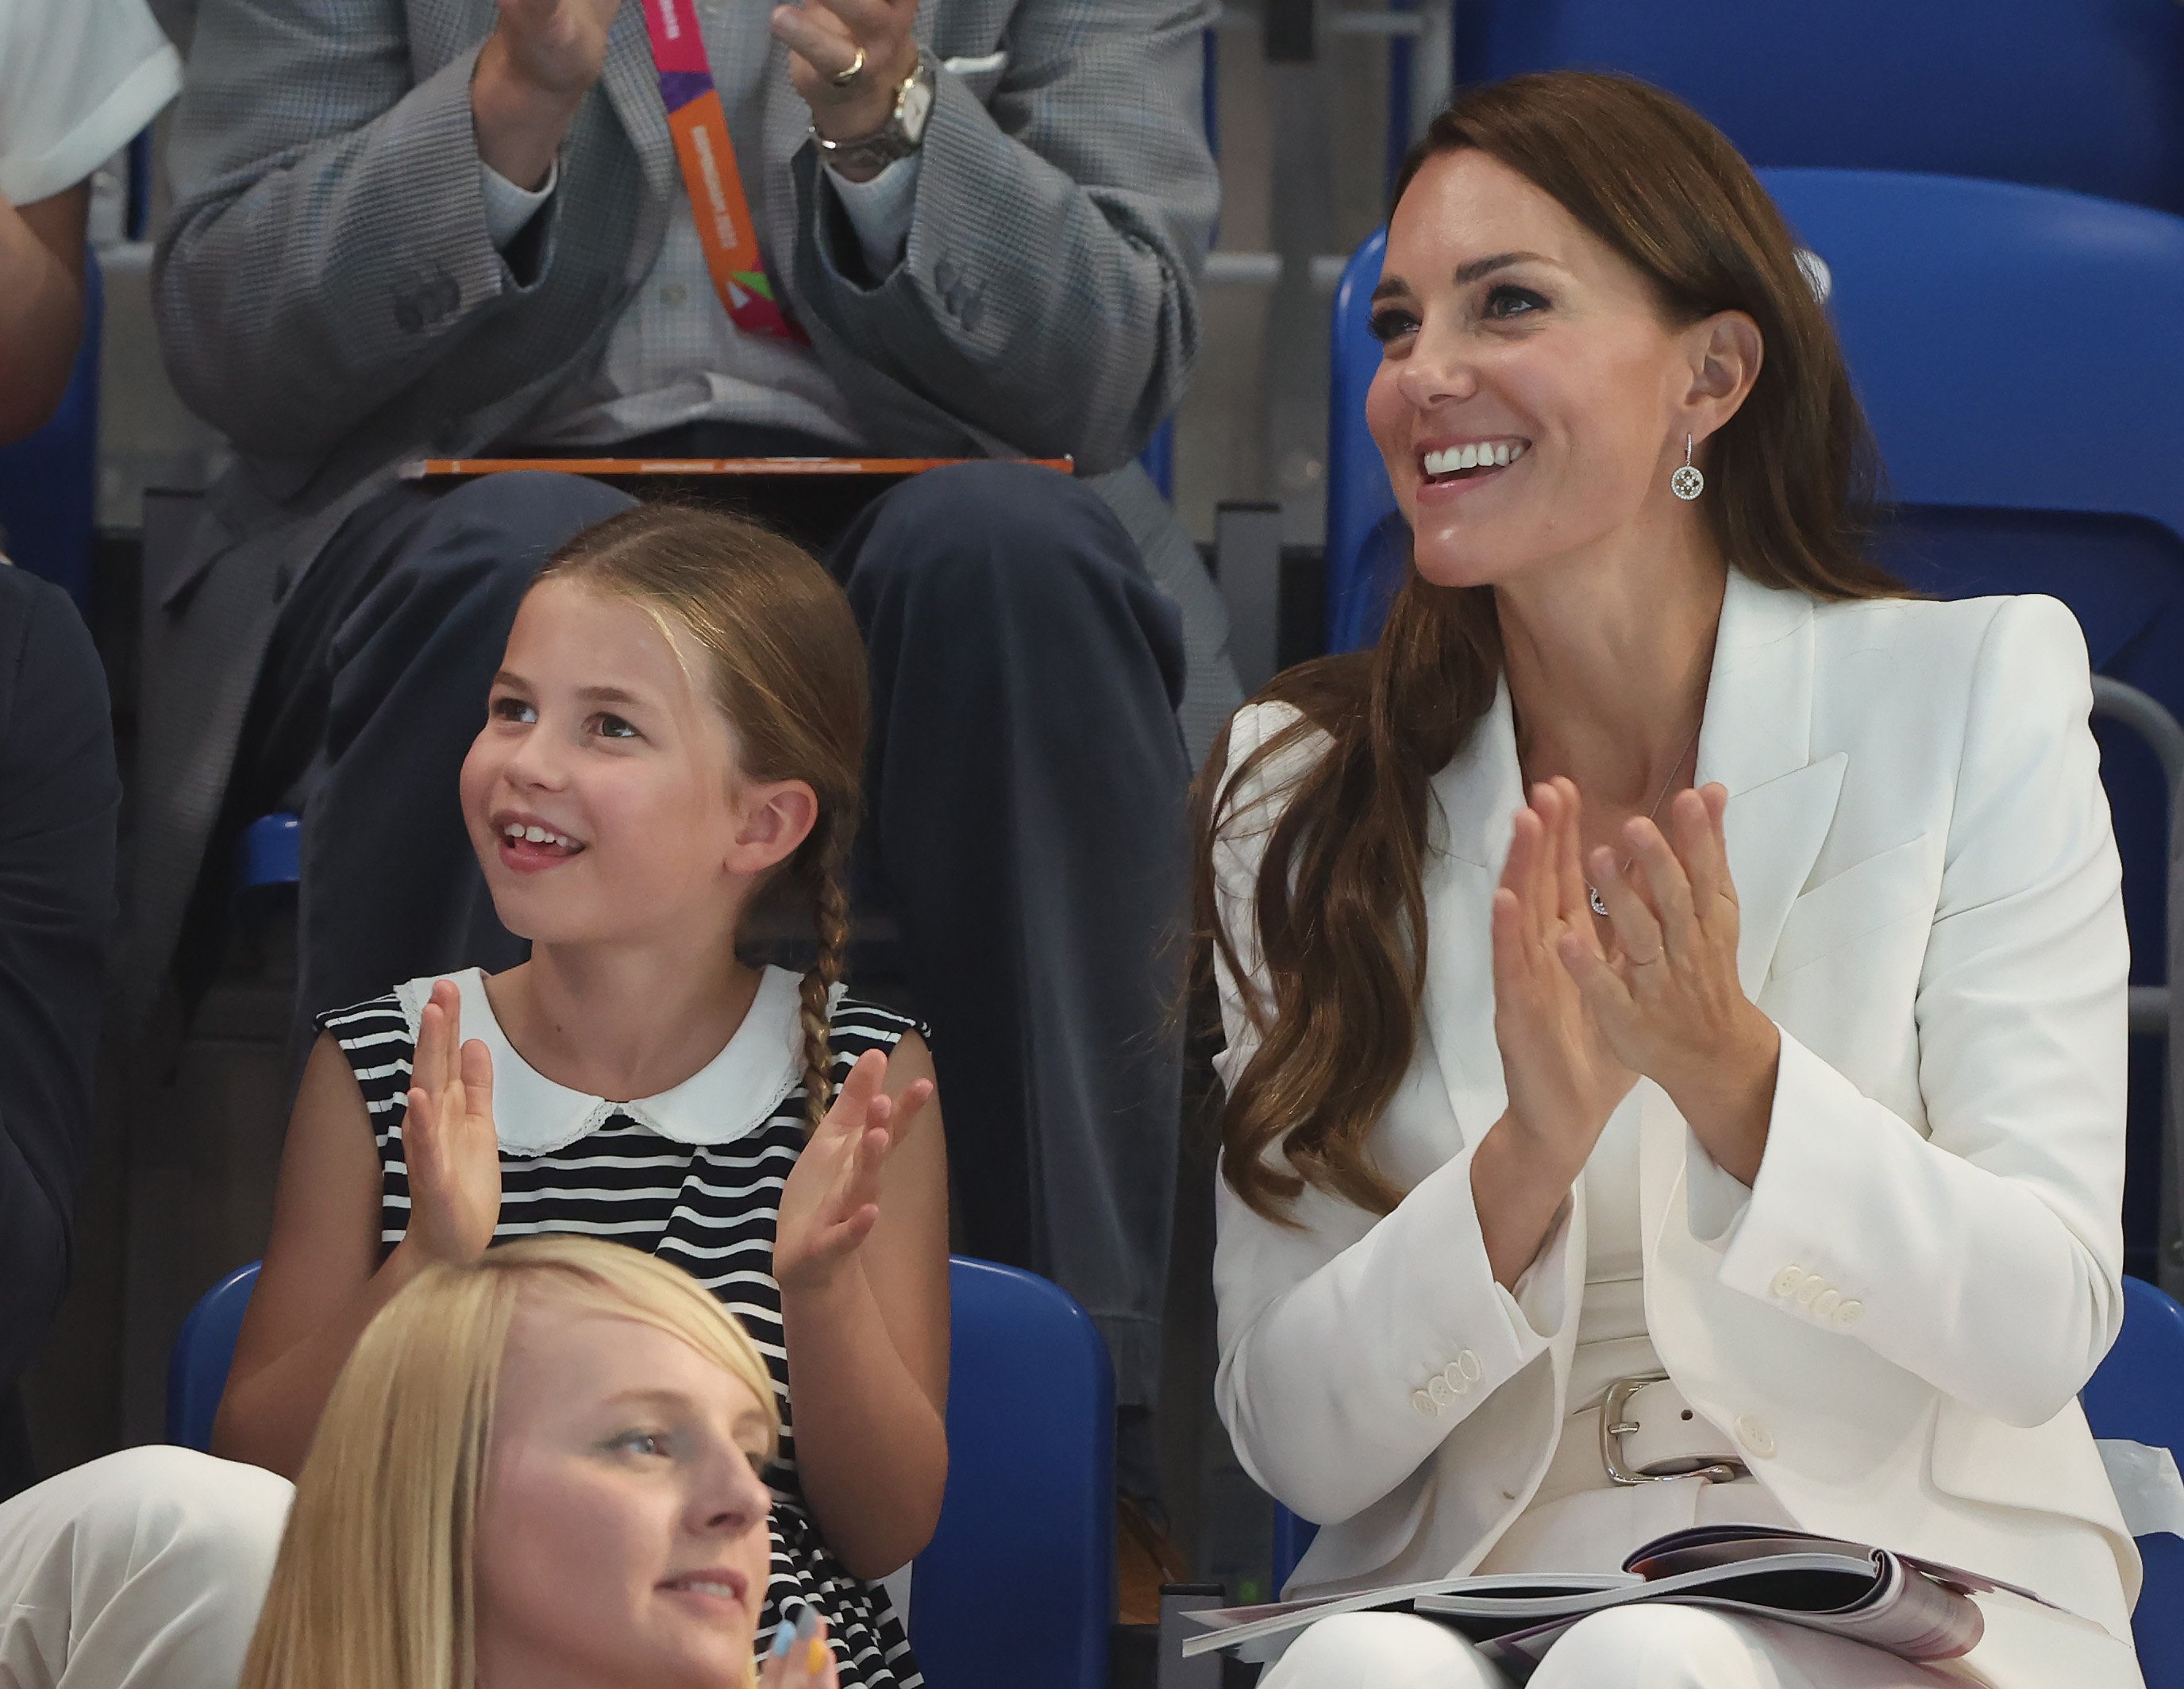 Kate Middleton and Princess Charlotte, who a body language expert says can fun just like her mom, clapping as they watch a morning swimming session at Birmingham 2022 Commonwealth Games